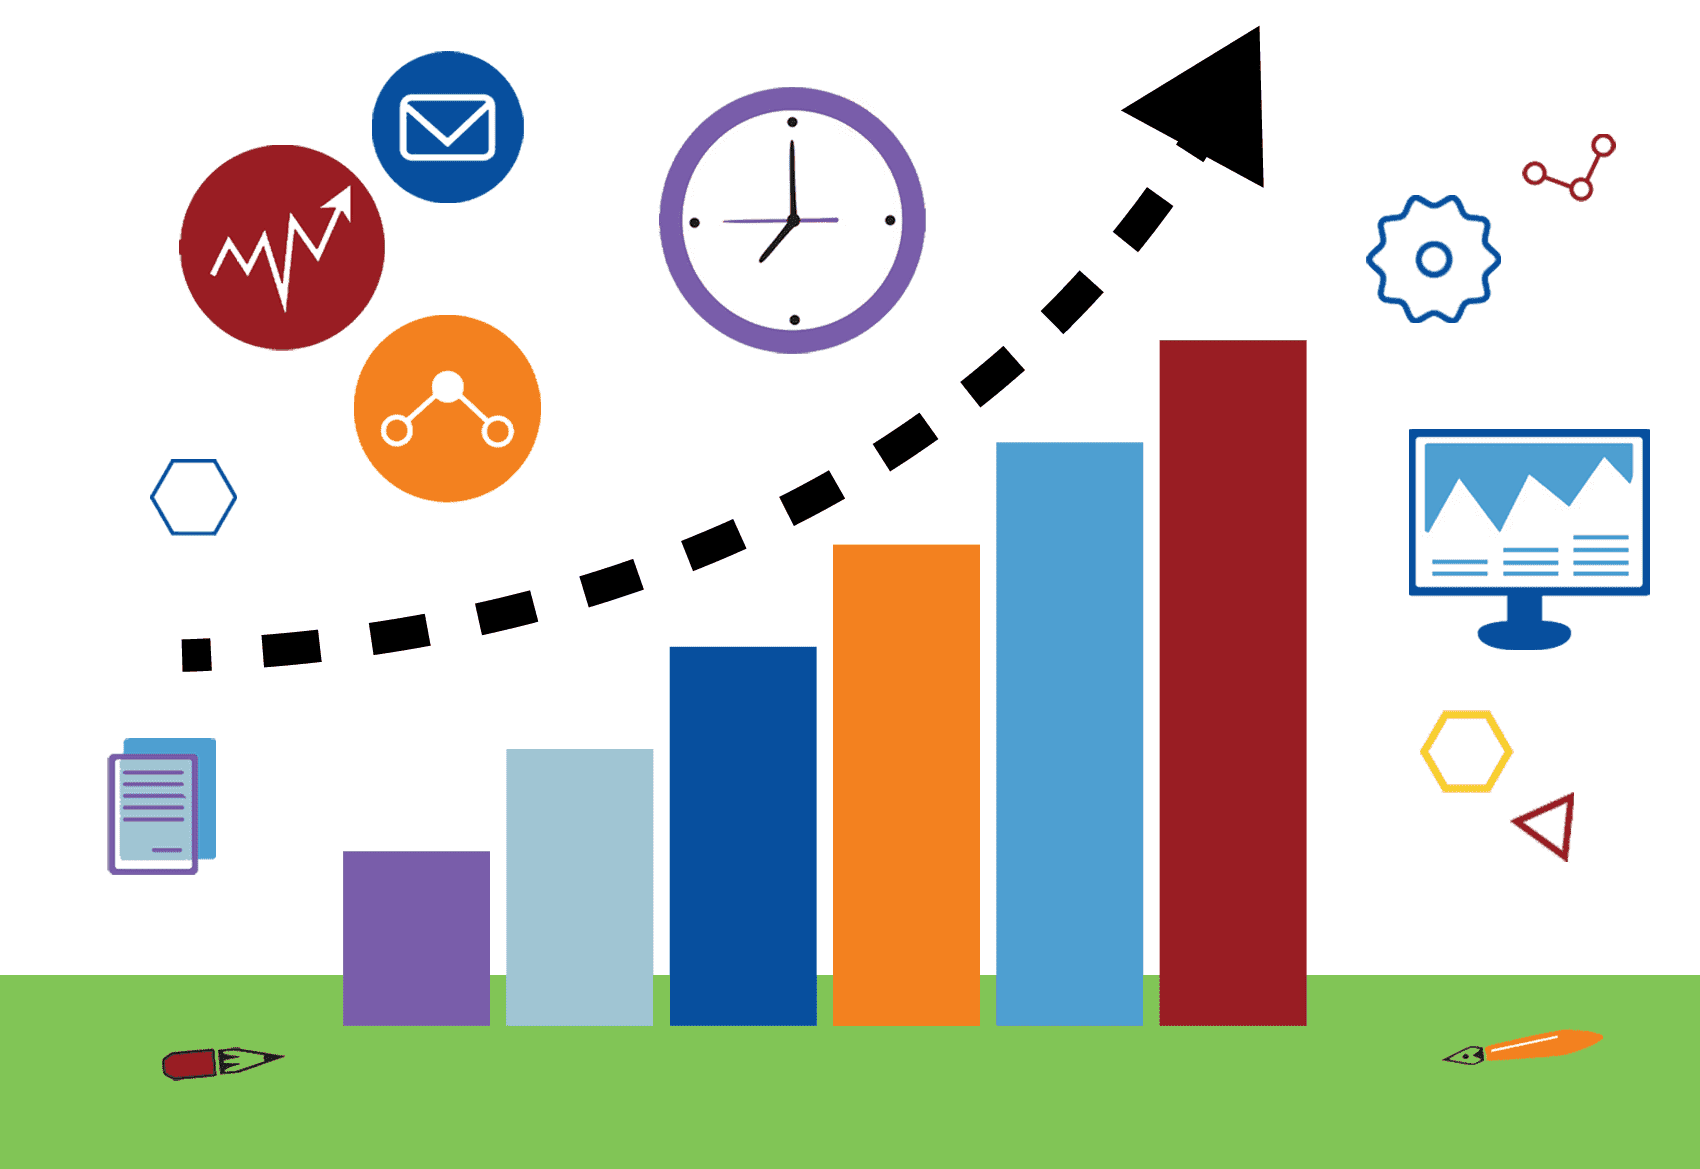 Illustration of an upward bar graph depicting the ability to scale to fit your needs